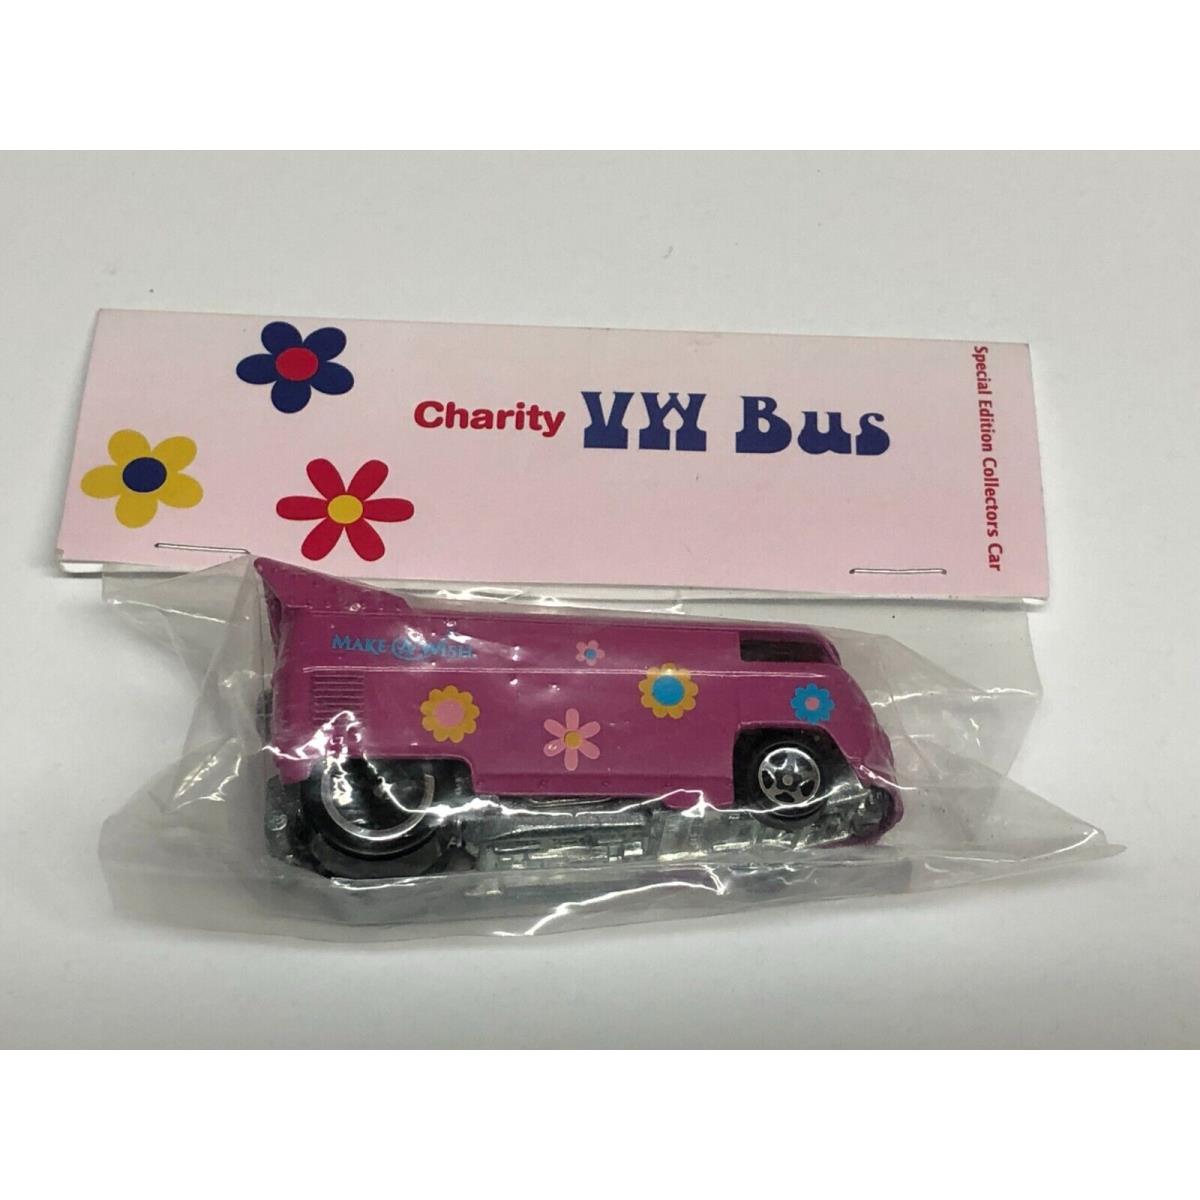 Volkswagen Charity VW Drag Bus Pink Hot Wheels 2007 CA Convention Bagged